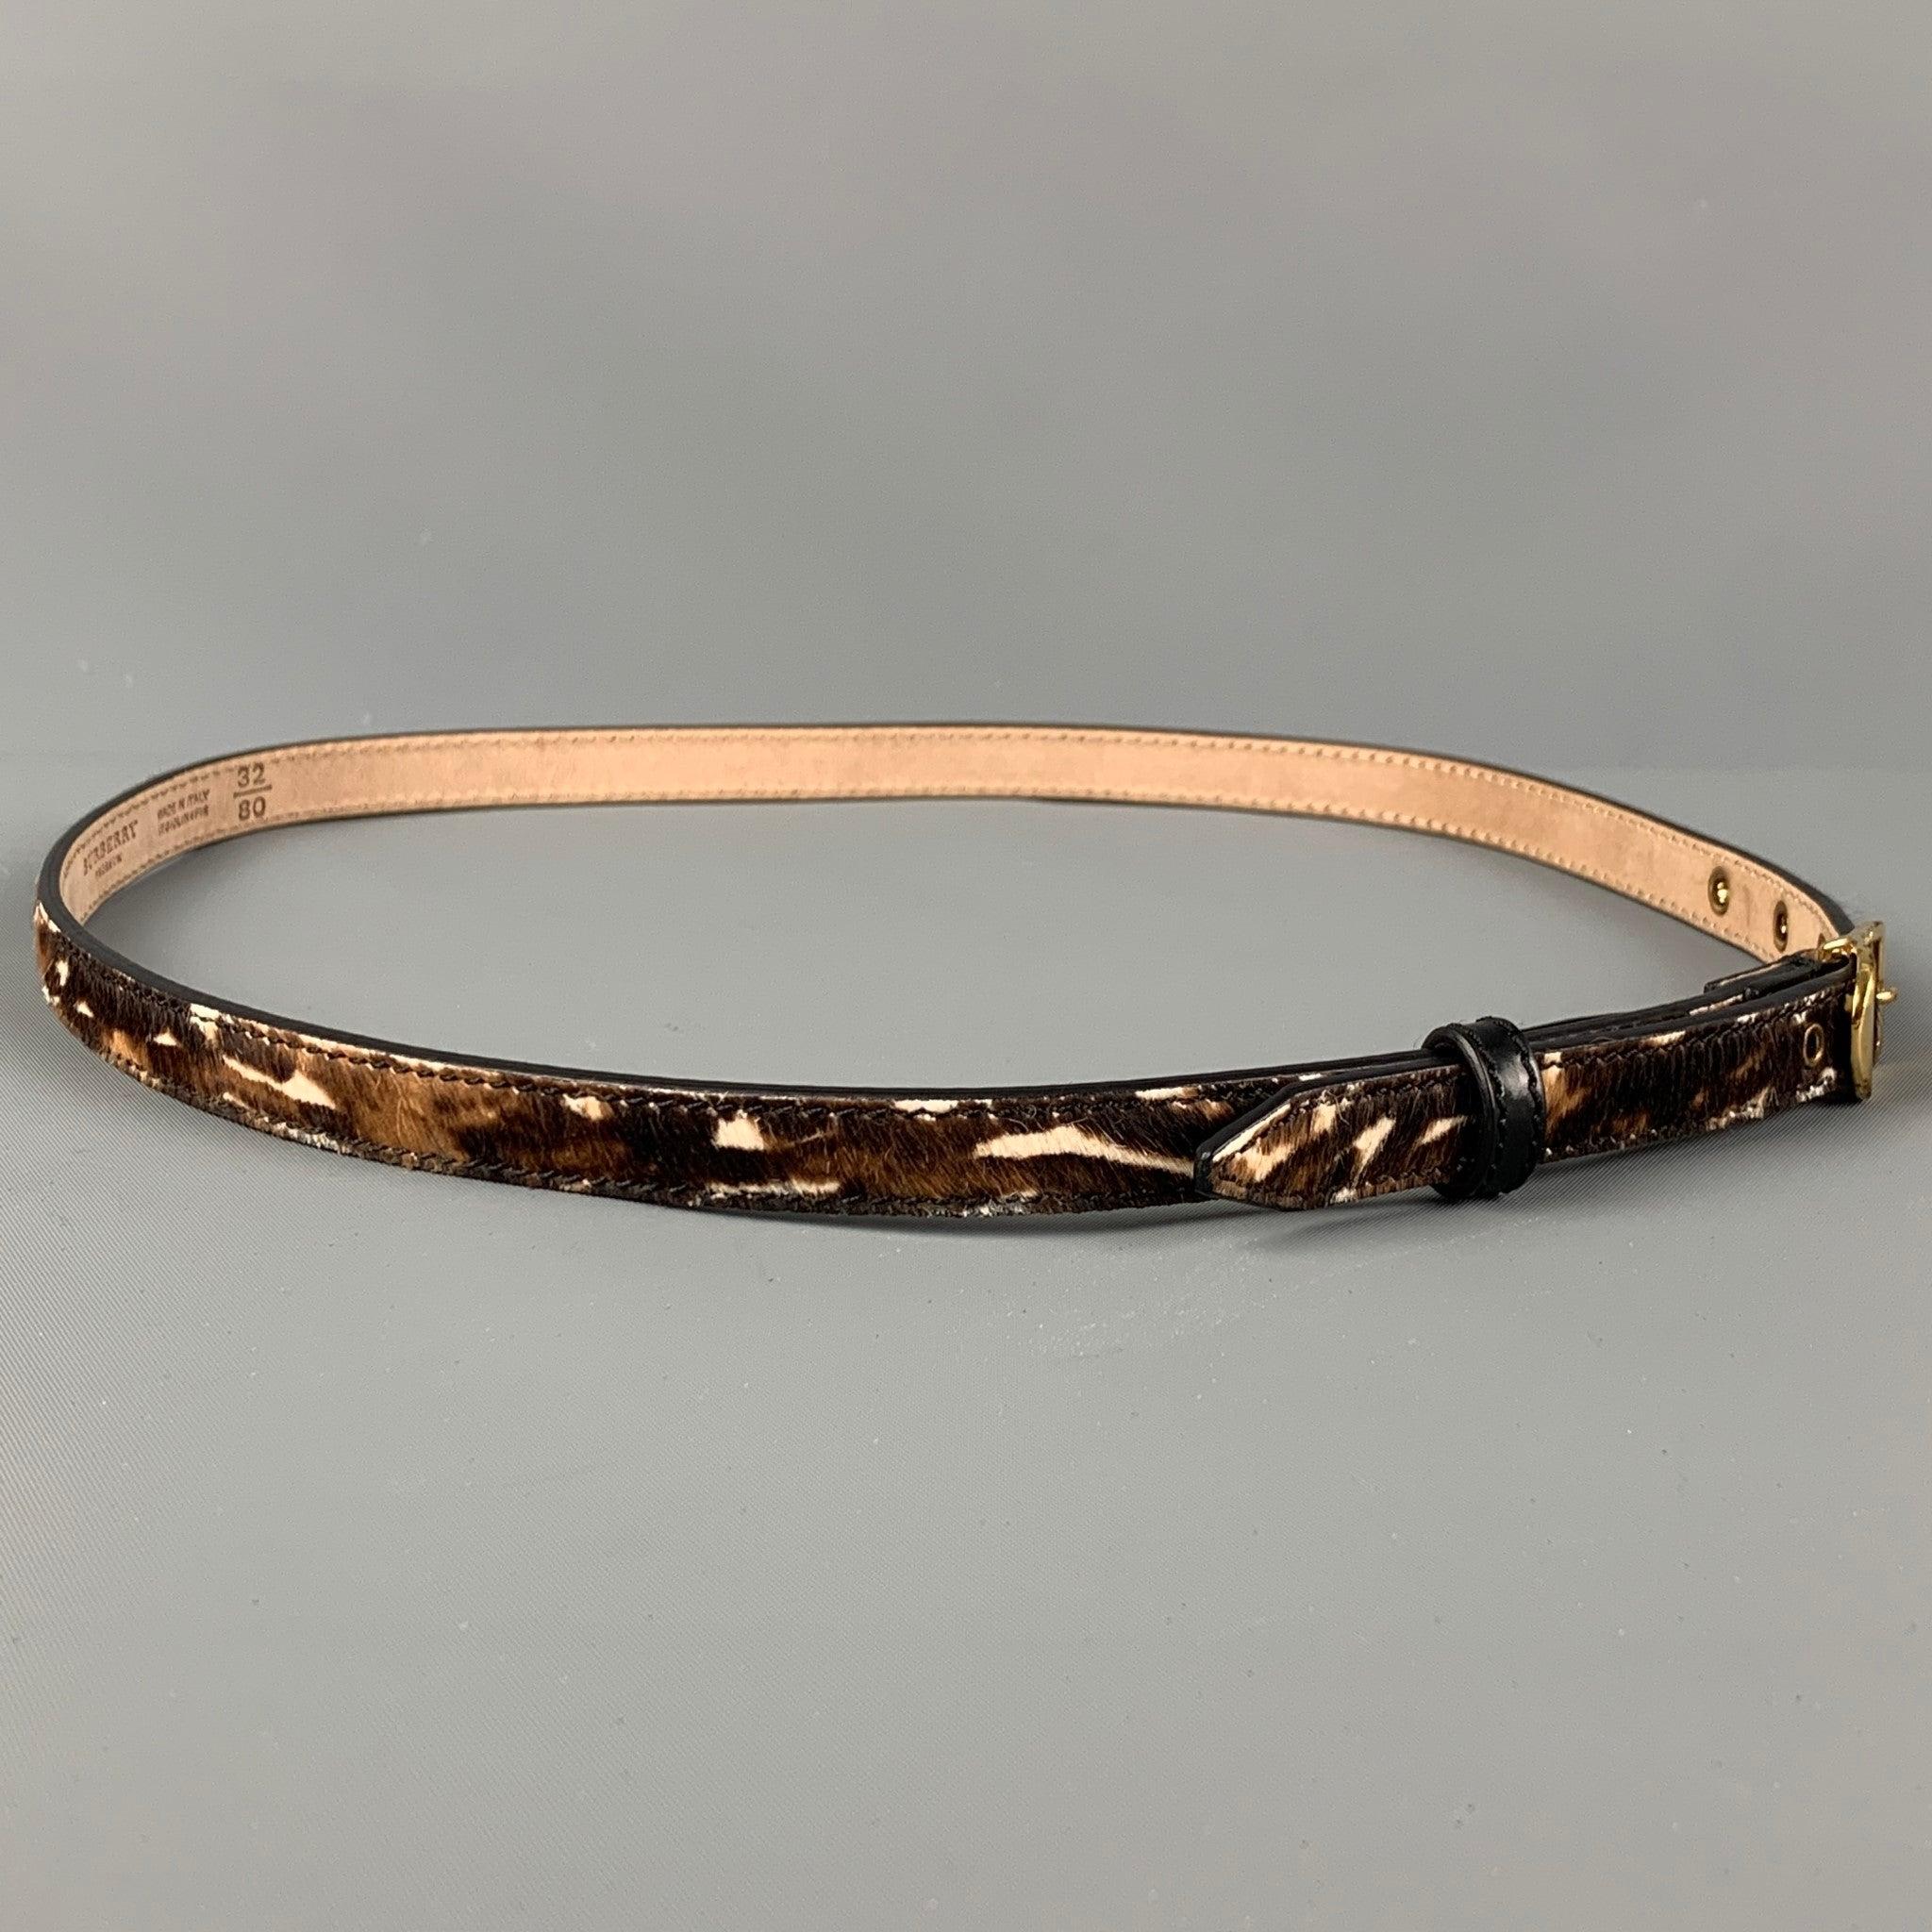 BURBERRY PRORSUM belt comes in a brown & white animal print pony hair featuring a gold tone buckle closure. Made in Italy.
Very Good
Pre-Owned Condition. 

Marked:   32/80Length: 37.5 inches  Width: 0.5 inches  Fits: 29 inches  - 33 inches  Buckle: